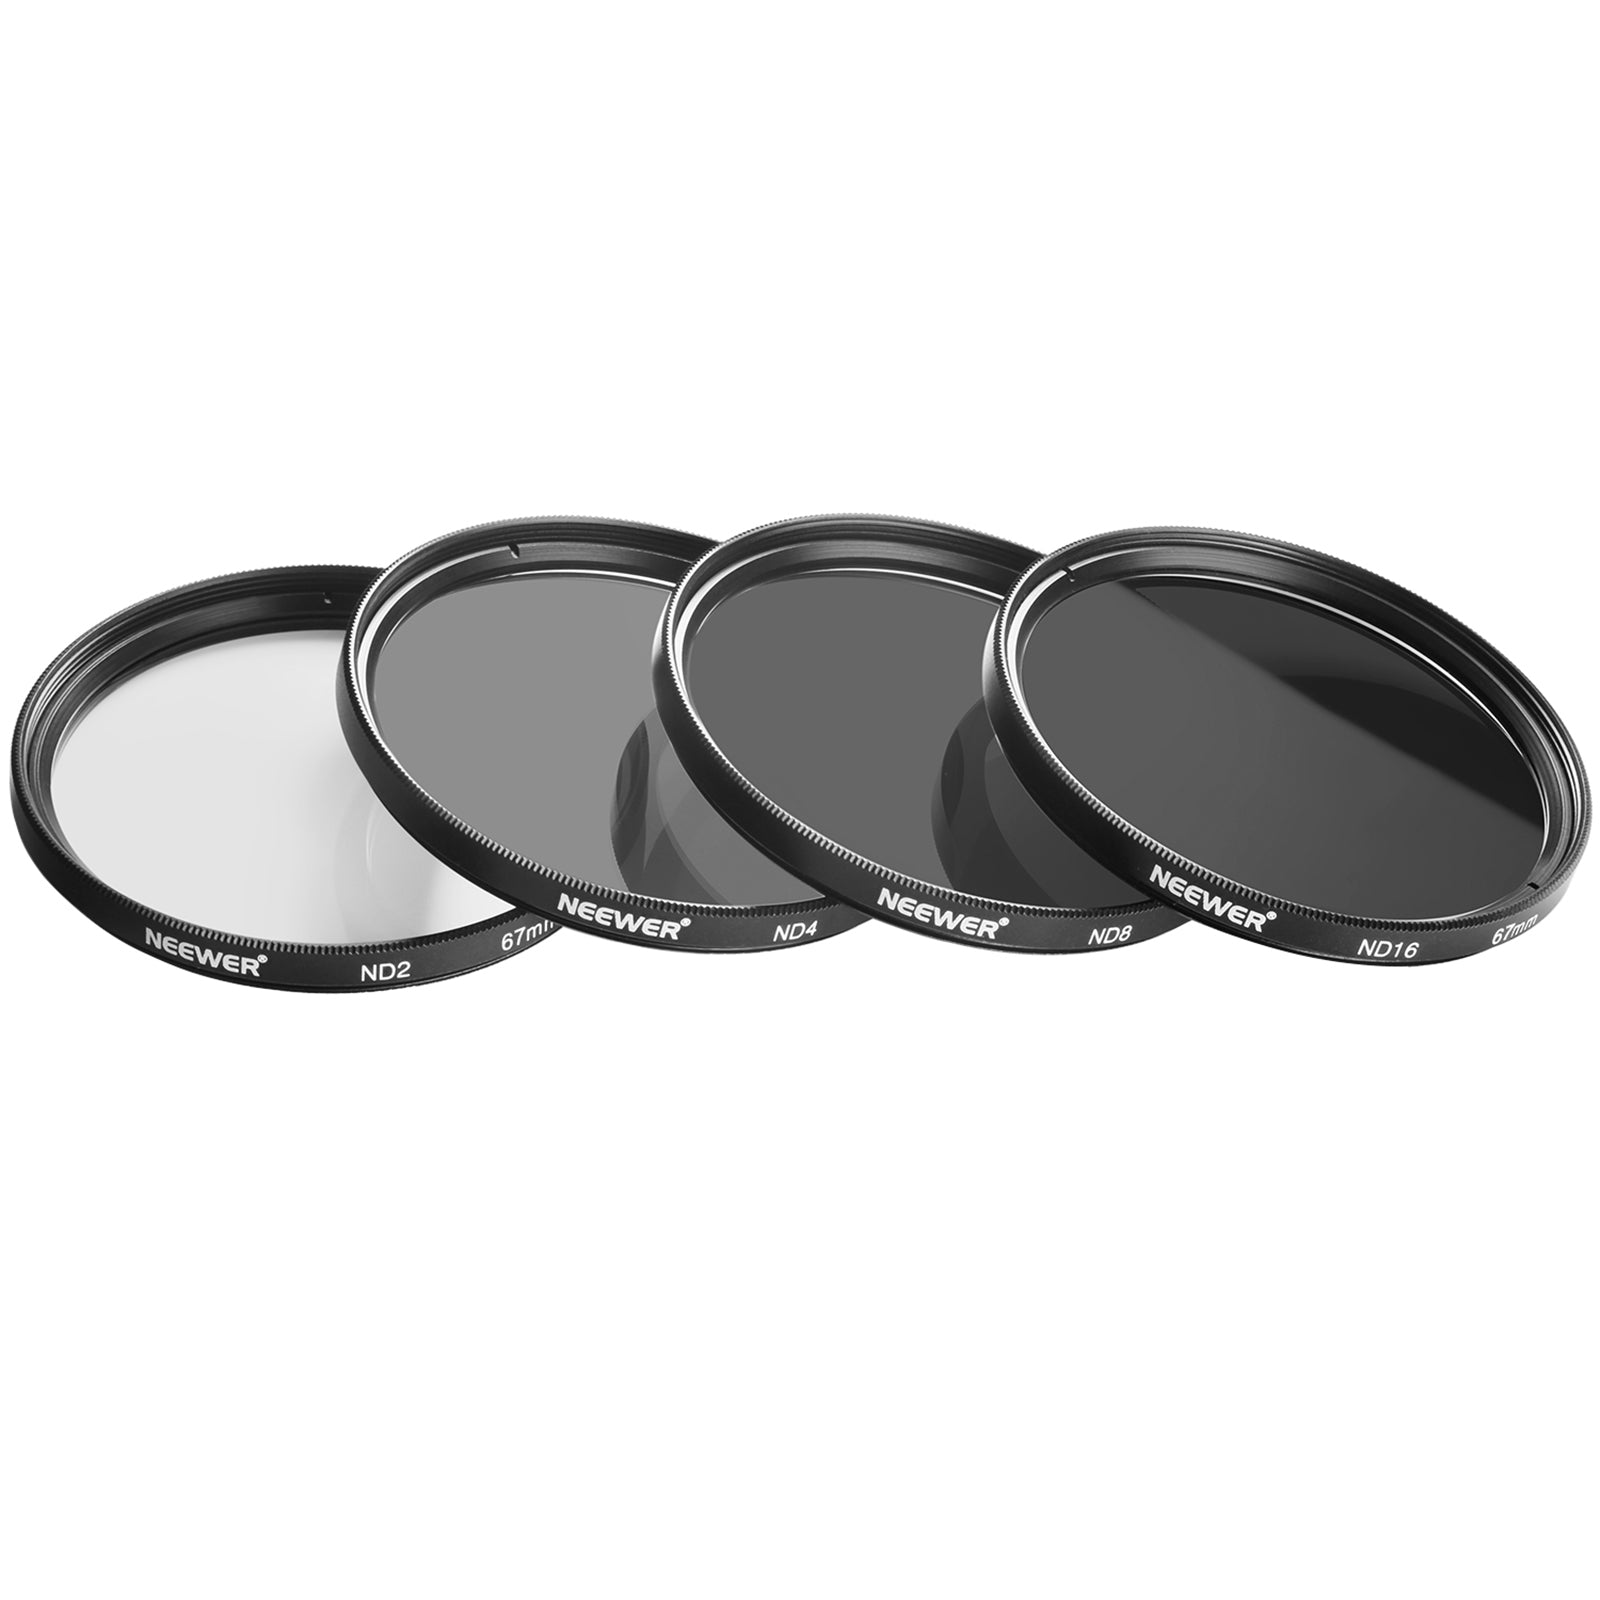 Neewer 67mm Neutral Density Filter ND2 ND4 ND8 ND16 and Accessories Kit